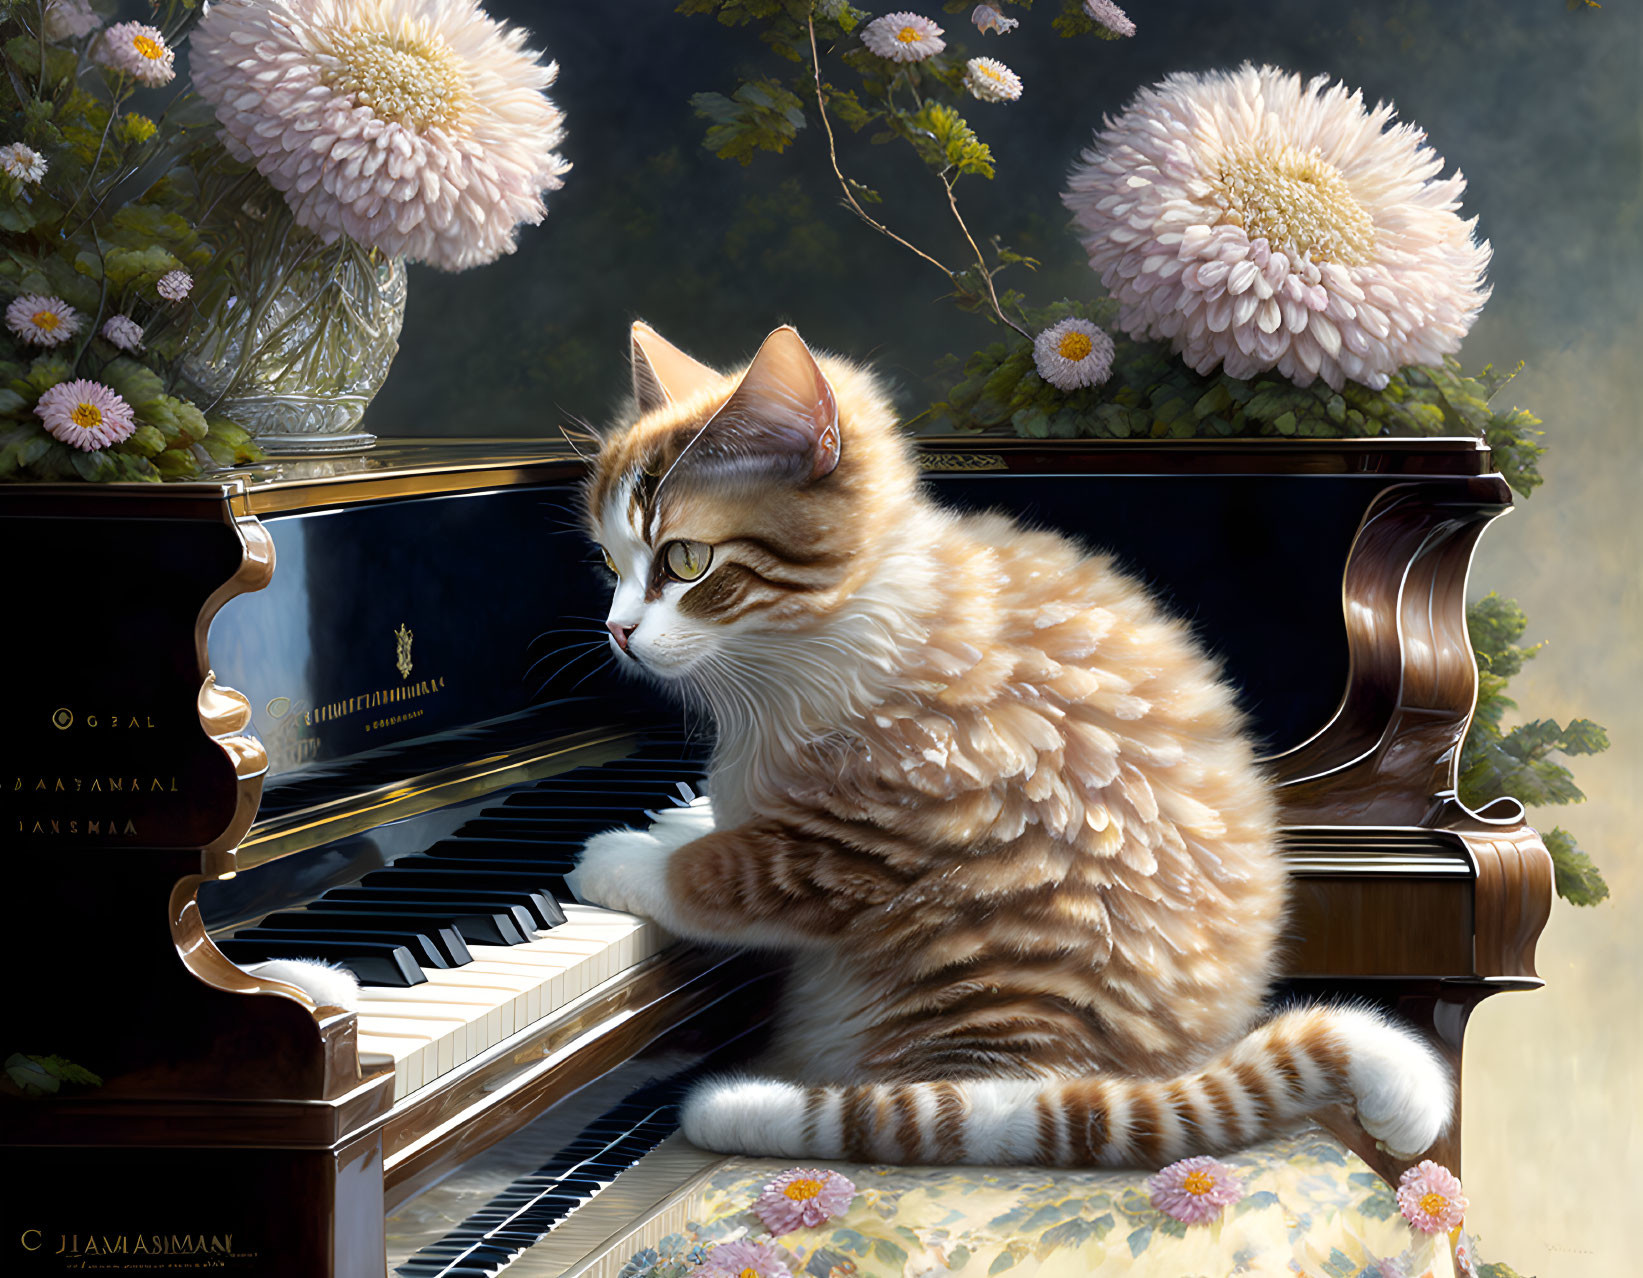 chrysanthemums cat playing a piano. extreme detail